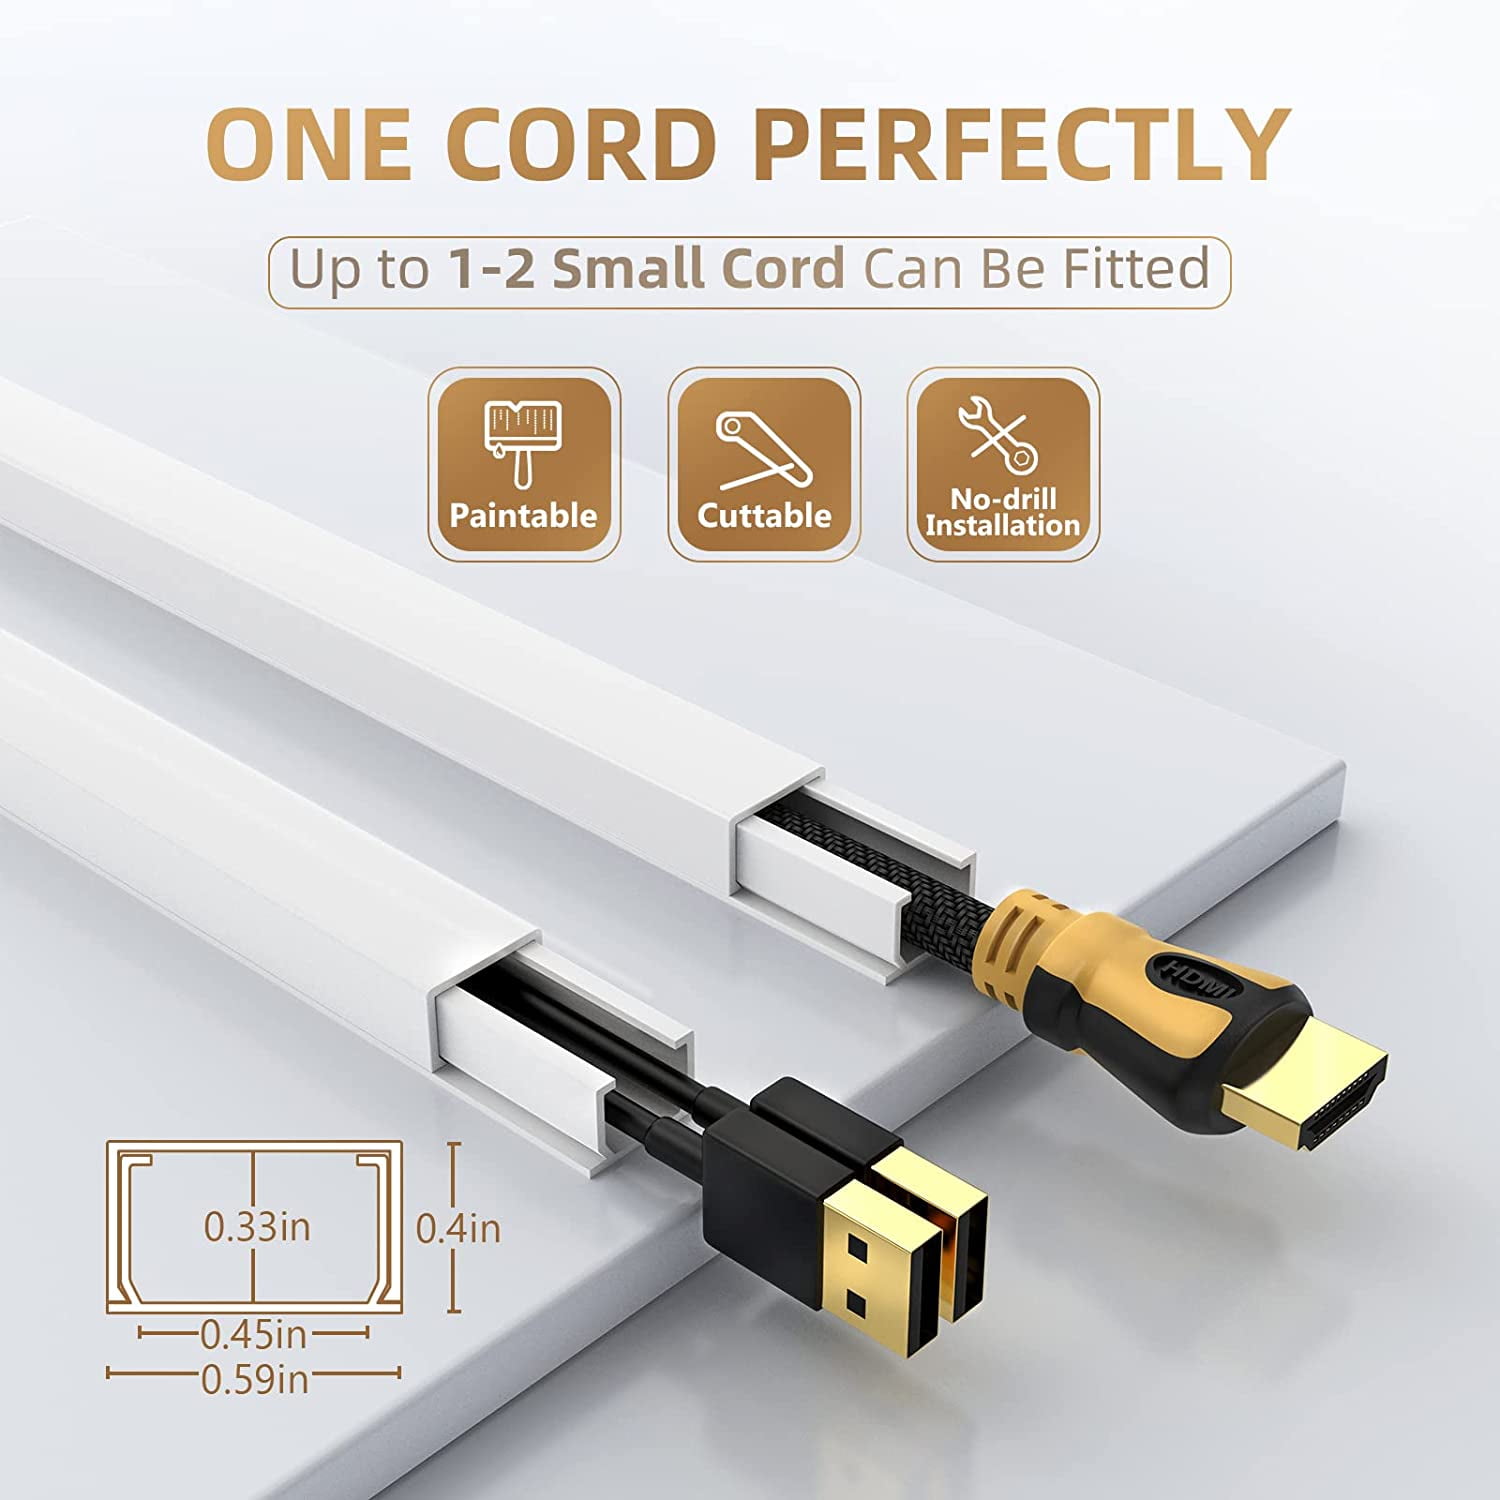 85in Corner Cable Concealer, Corner Cord Hider for One Cord, Wire